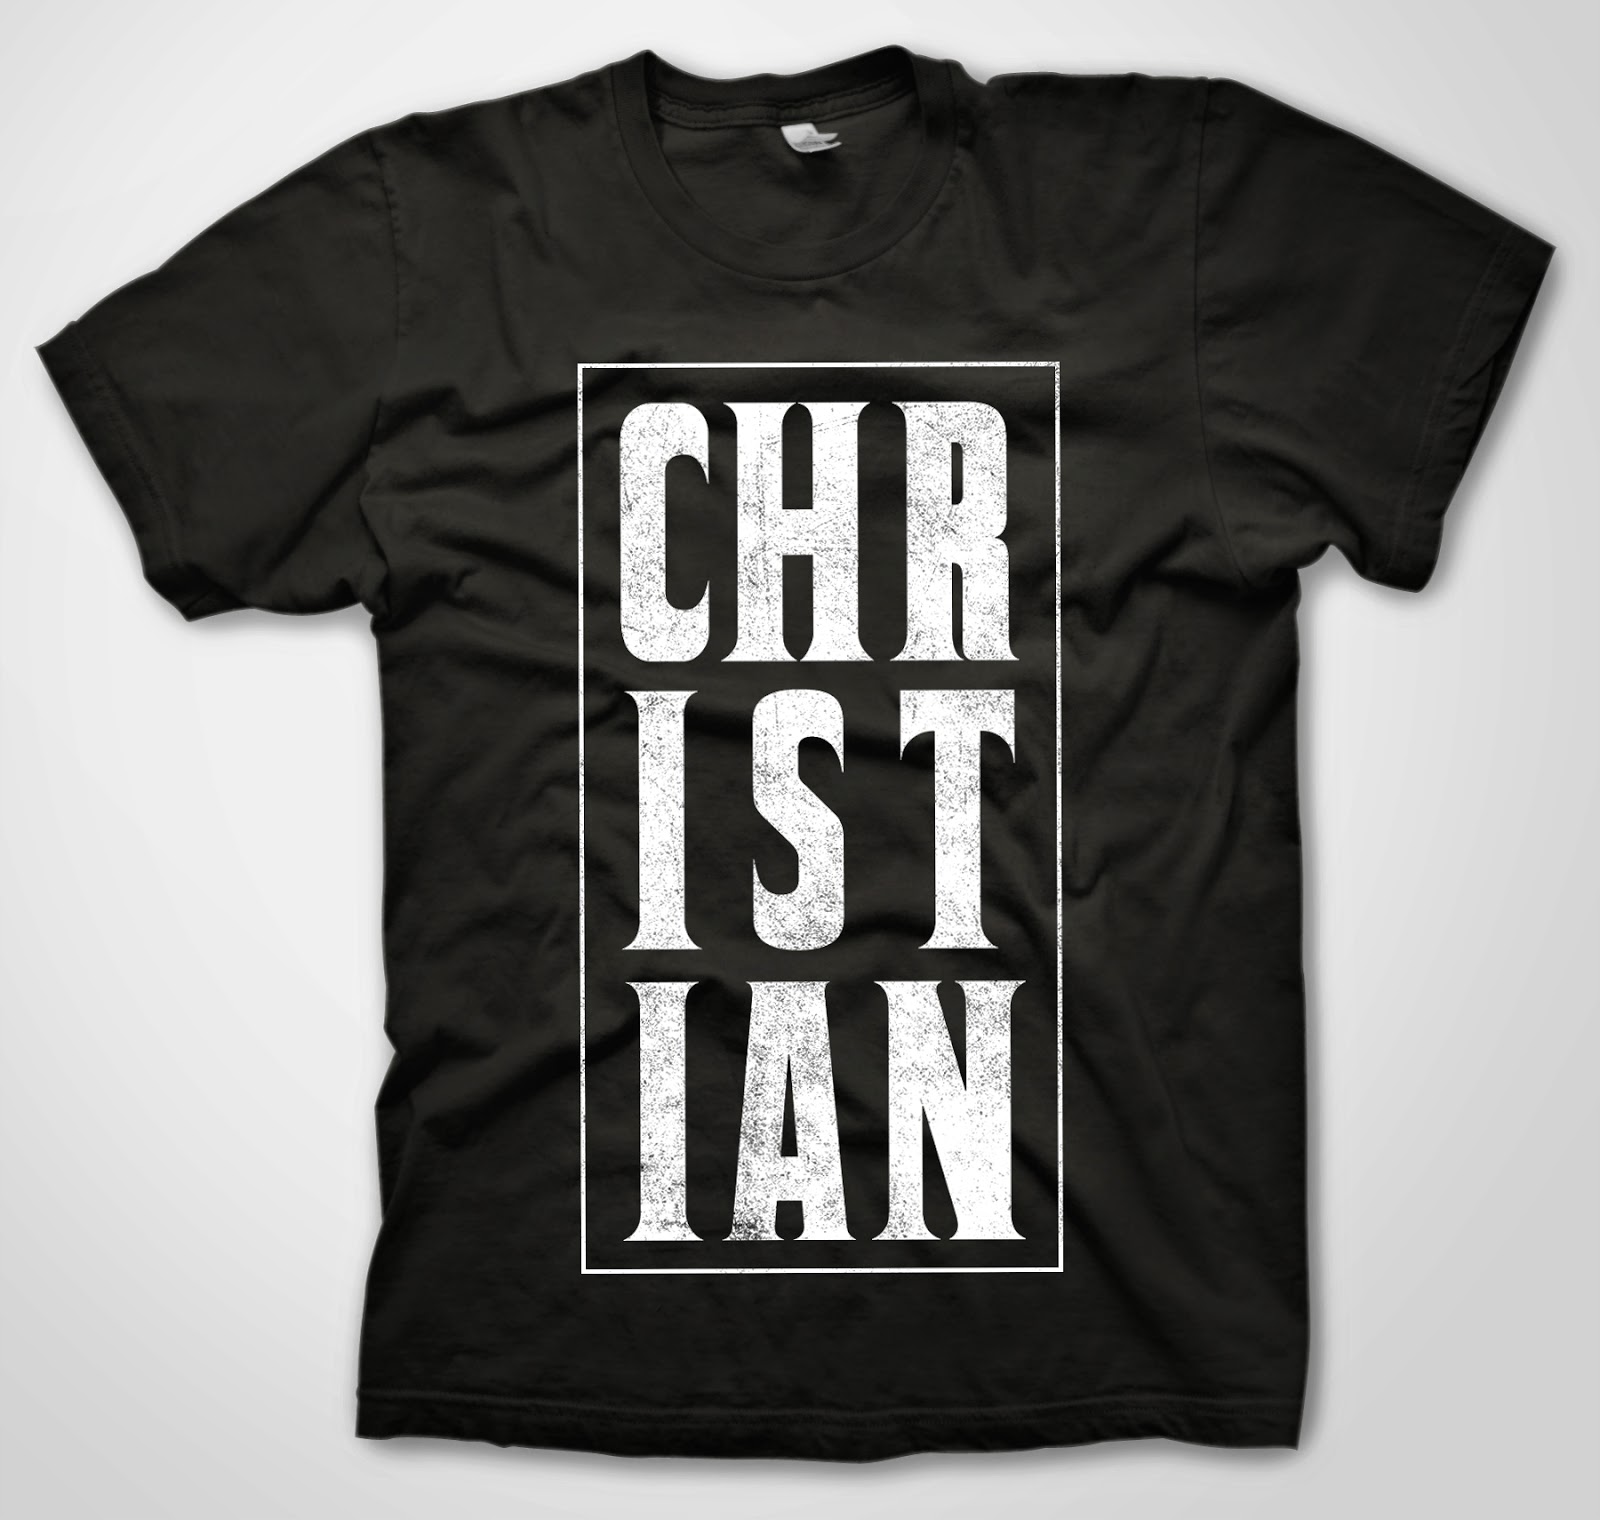 5-outstanding-christian-t-shirt-designs-once-upon-a-tee